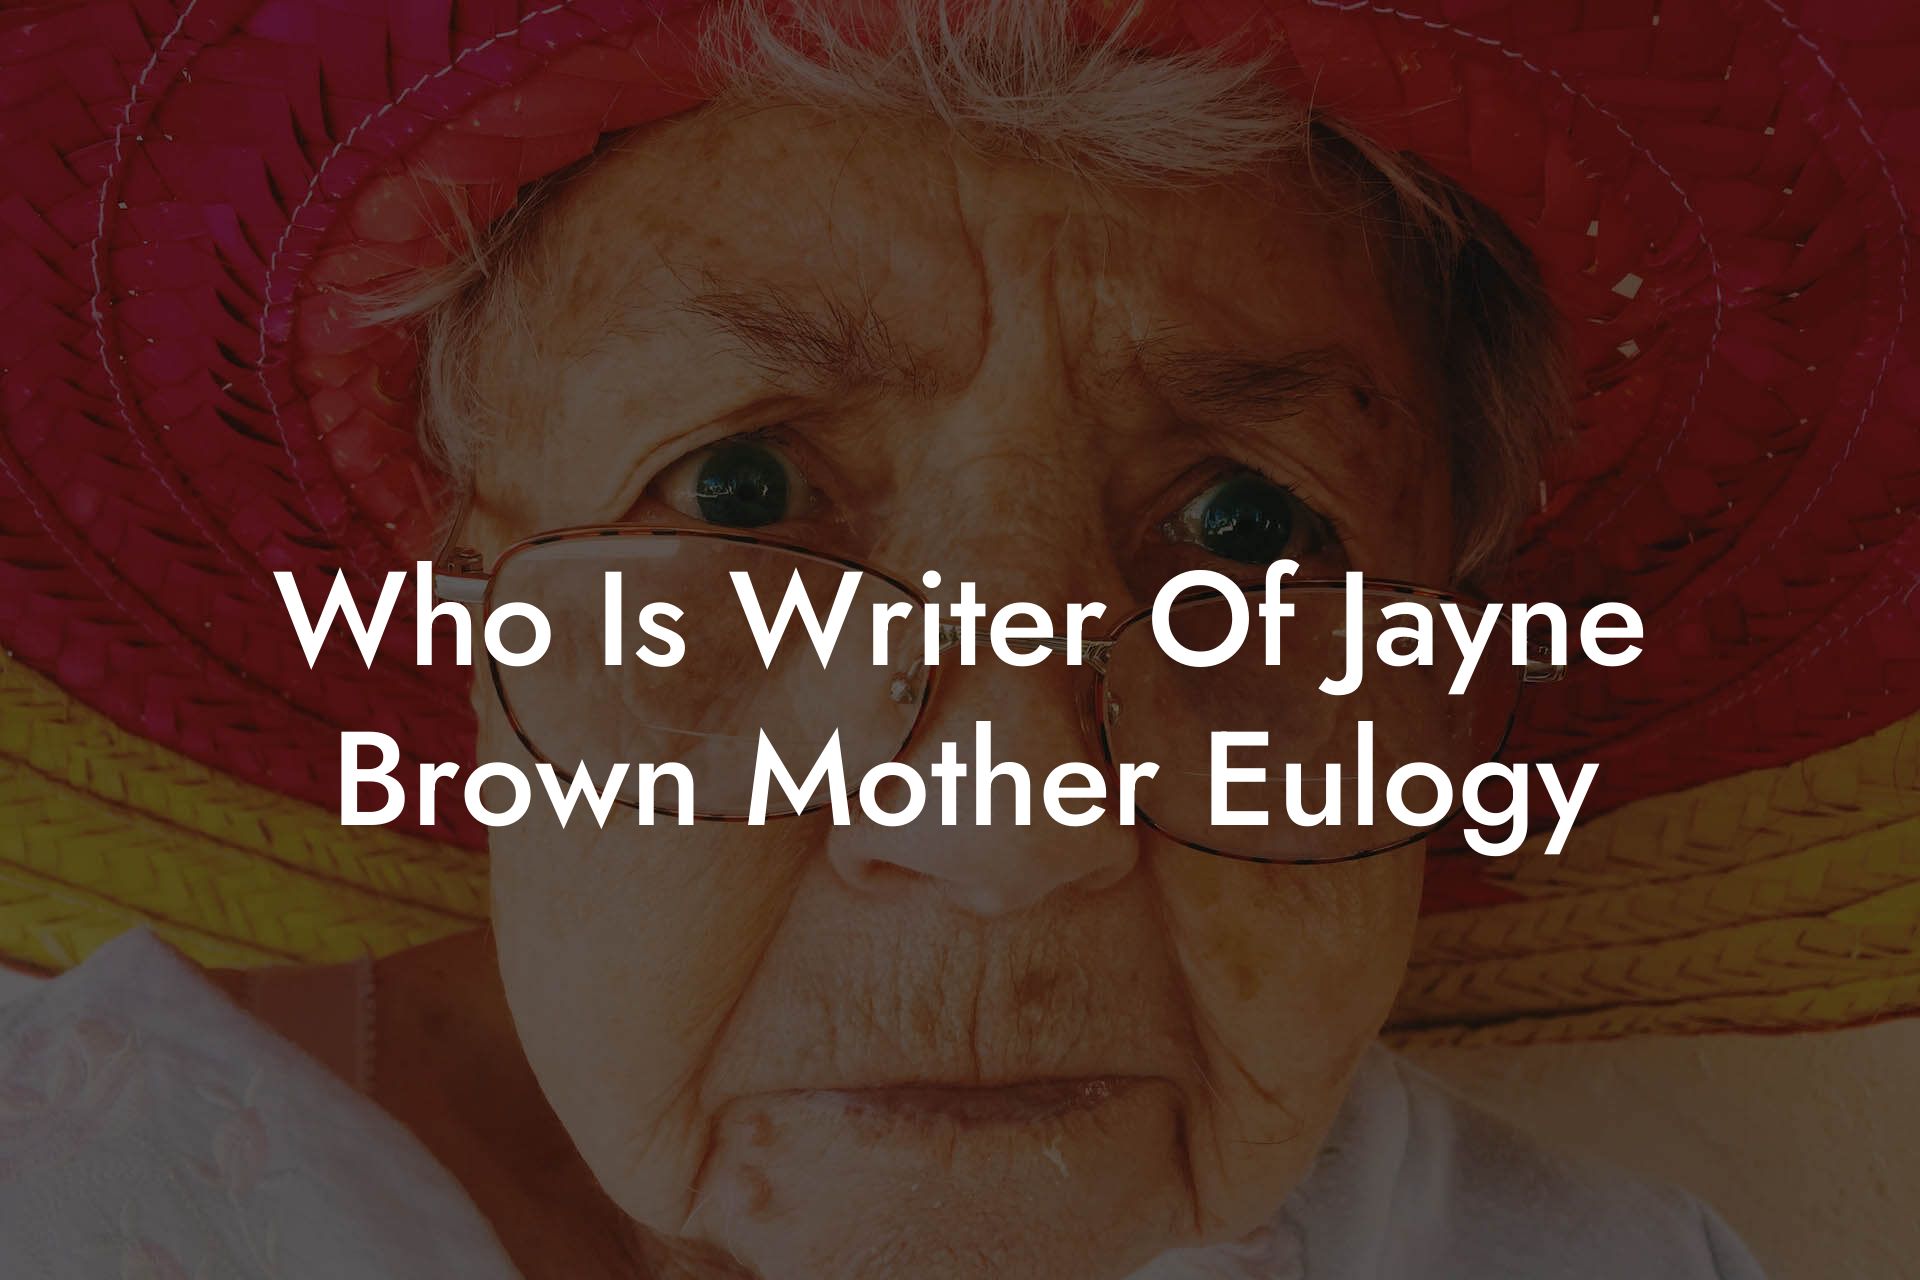 Who Is Writer Of Jayne Brown Mother Eulogy